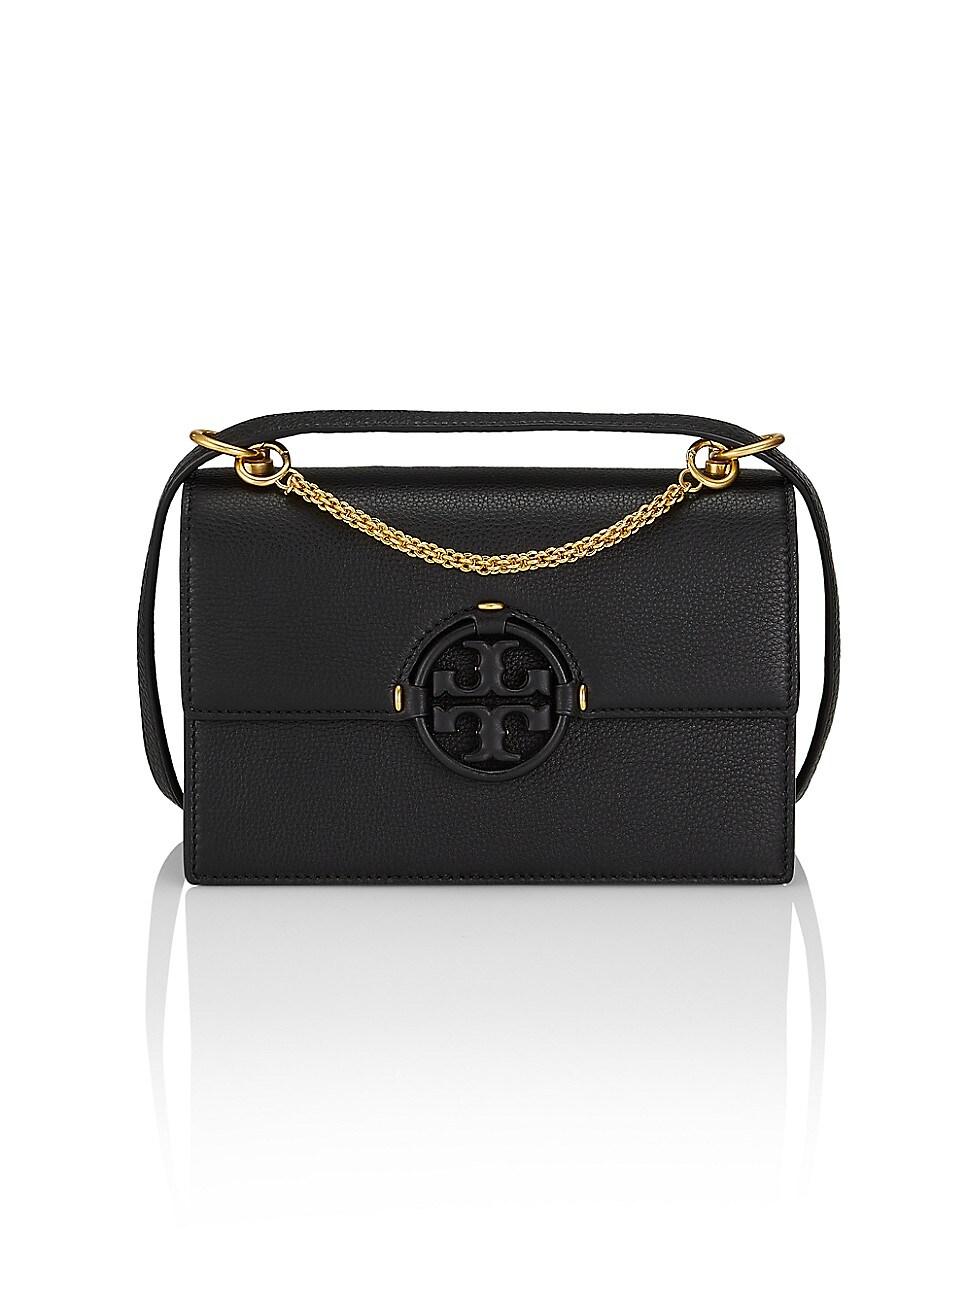 Tory Burch Small Miller Leather Flap Shoulder Bag in Black | Lyst